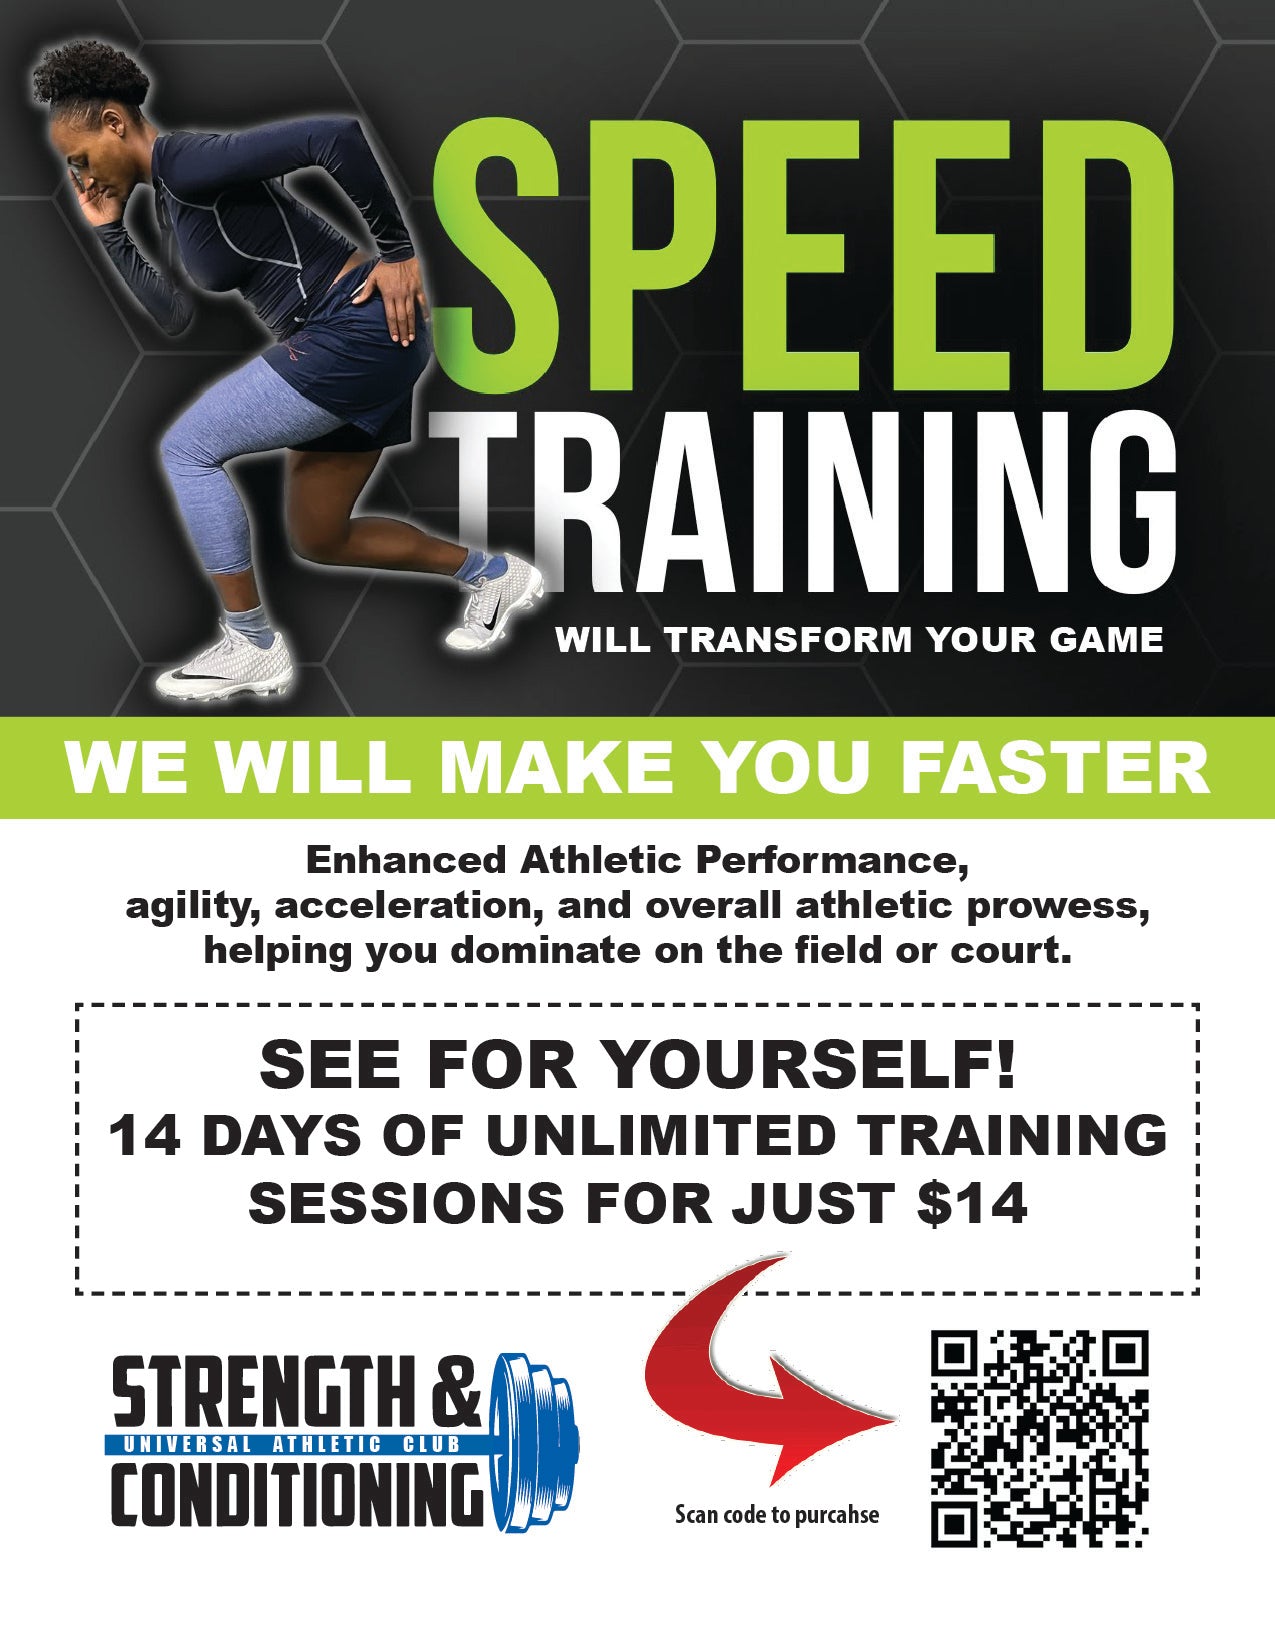 2 Weeks Unlimited Youth Training Sessions $14